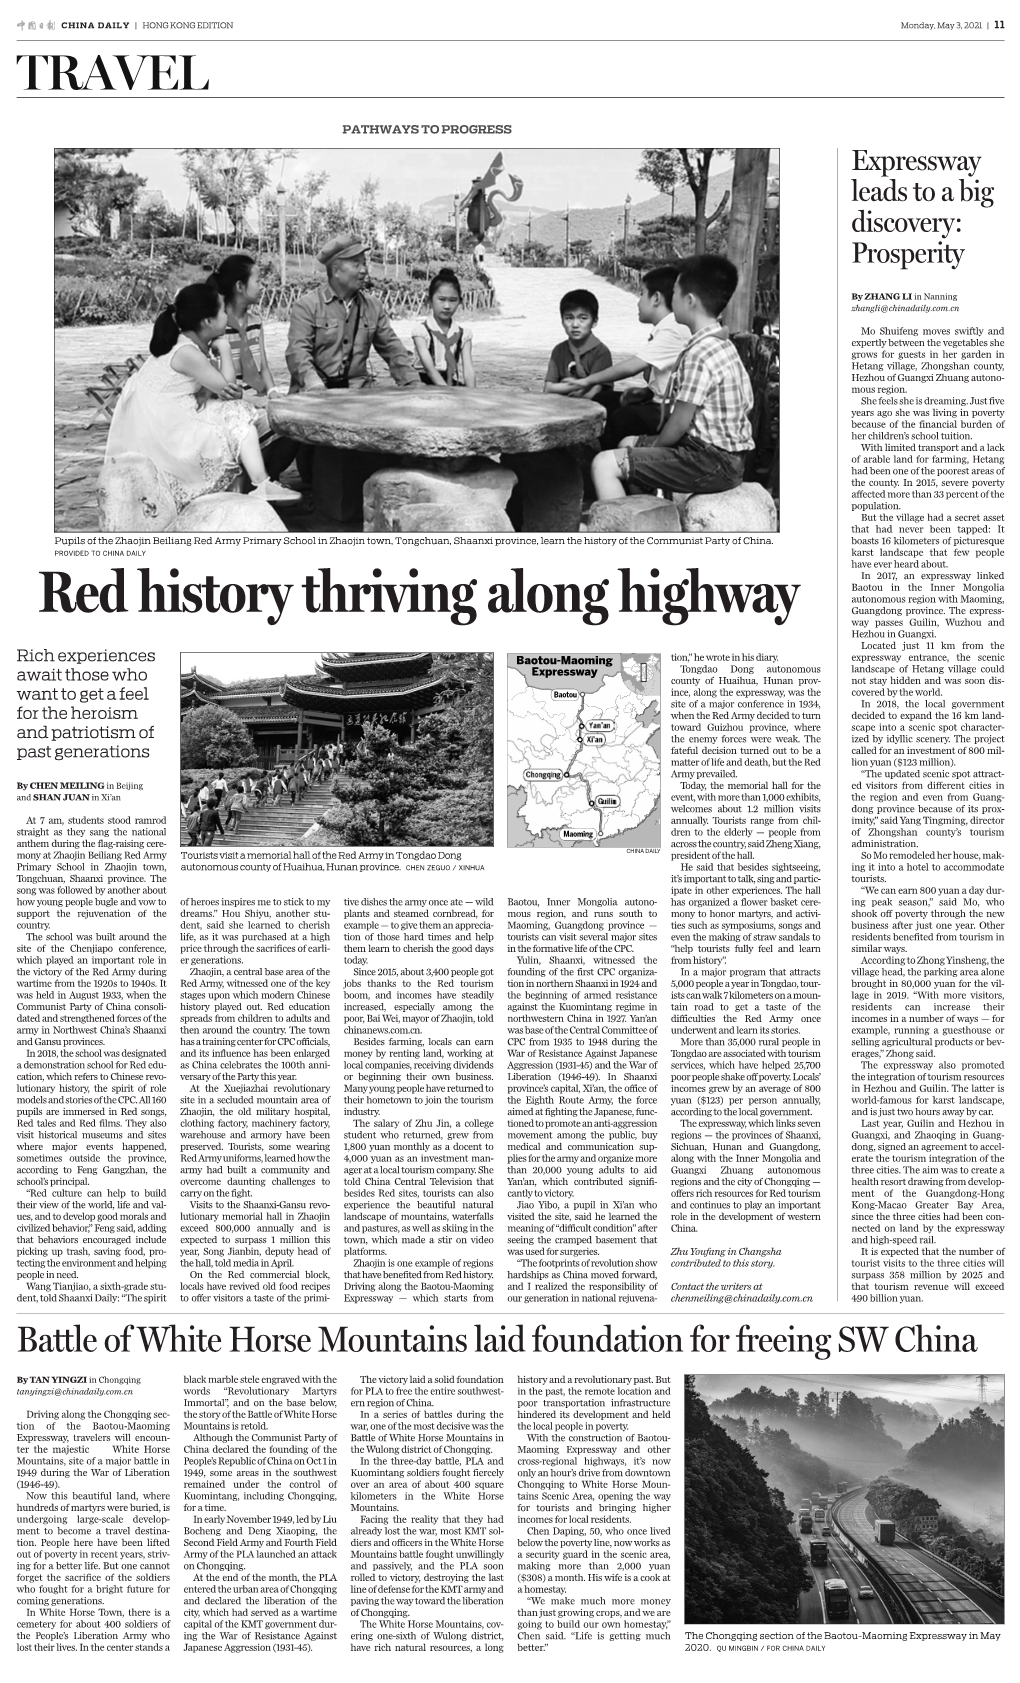 Red History Thriving Along Highway Guangdong Province